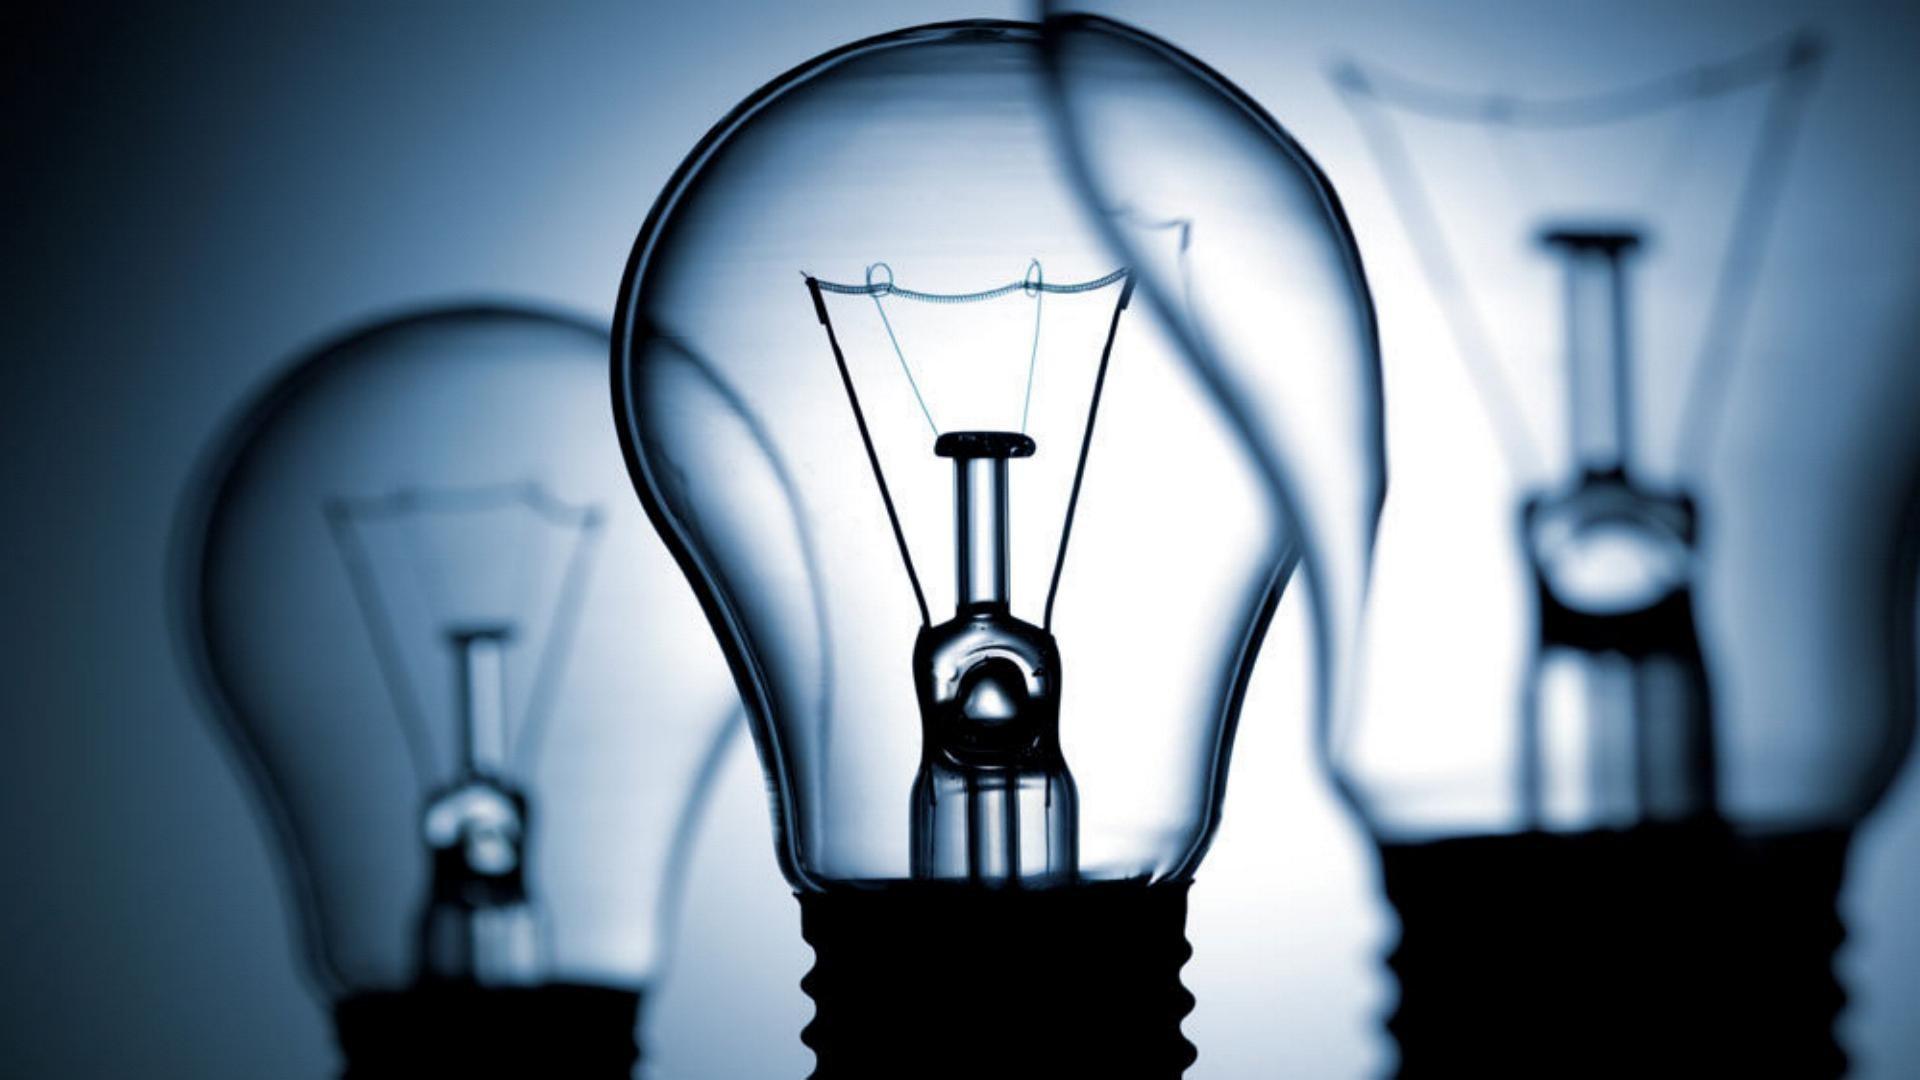 7 Ways to Think Up Great Startup Ideas